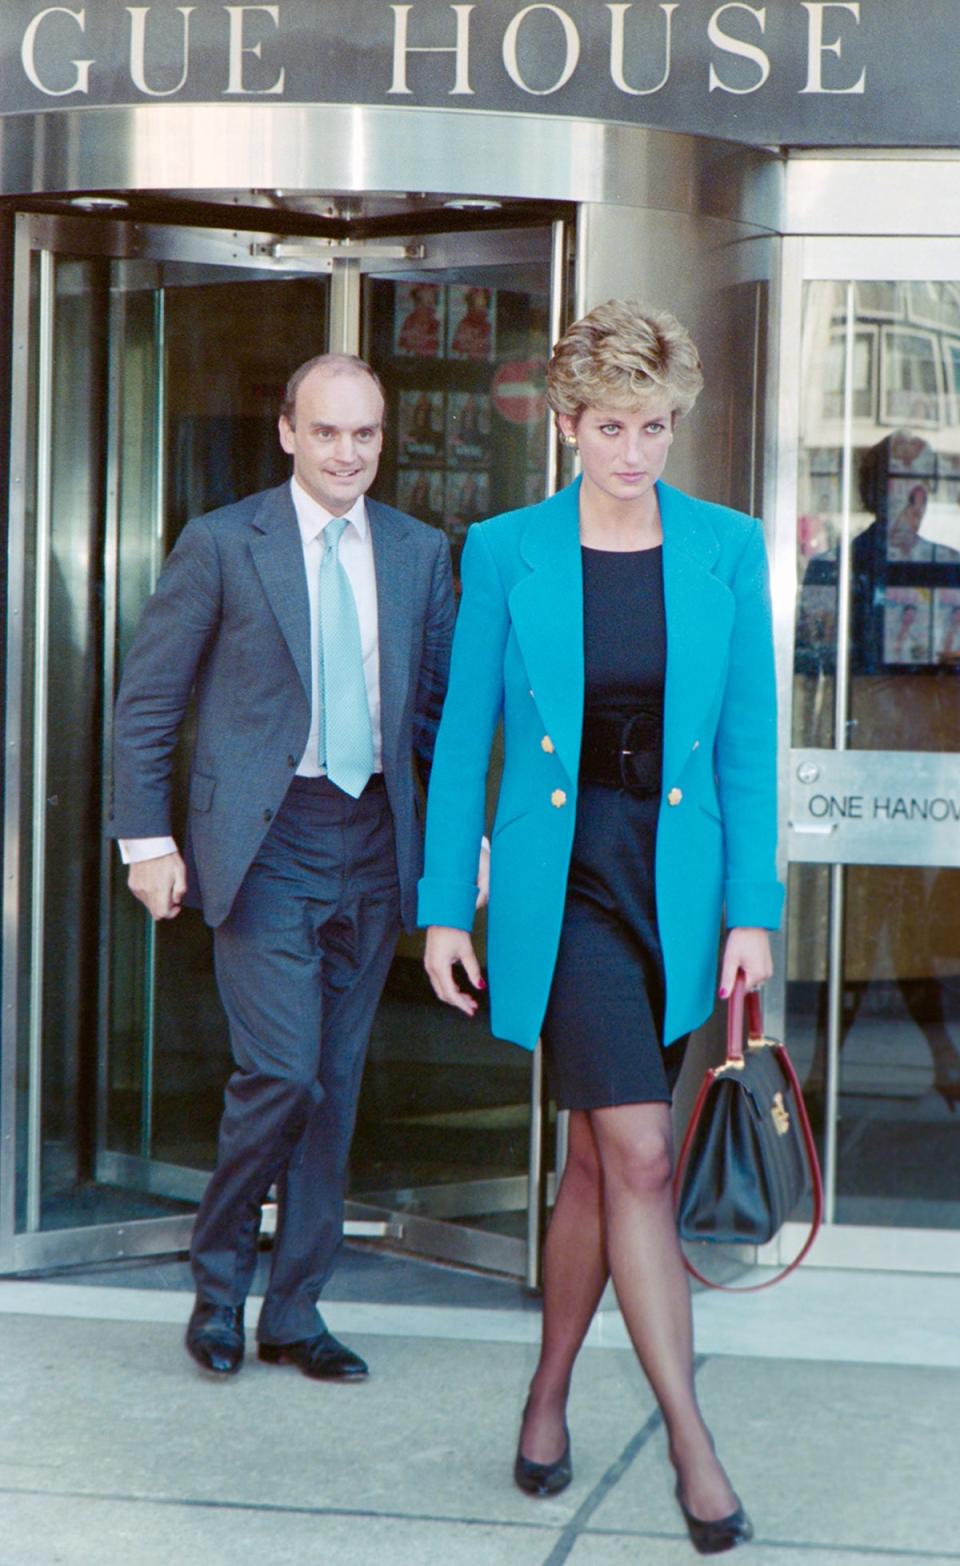 Sir Nicholas Coleridge and Princess Diana leave the Vogue House offices in 1994 (News Group Newspapers/News Licensing)